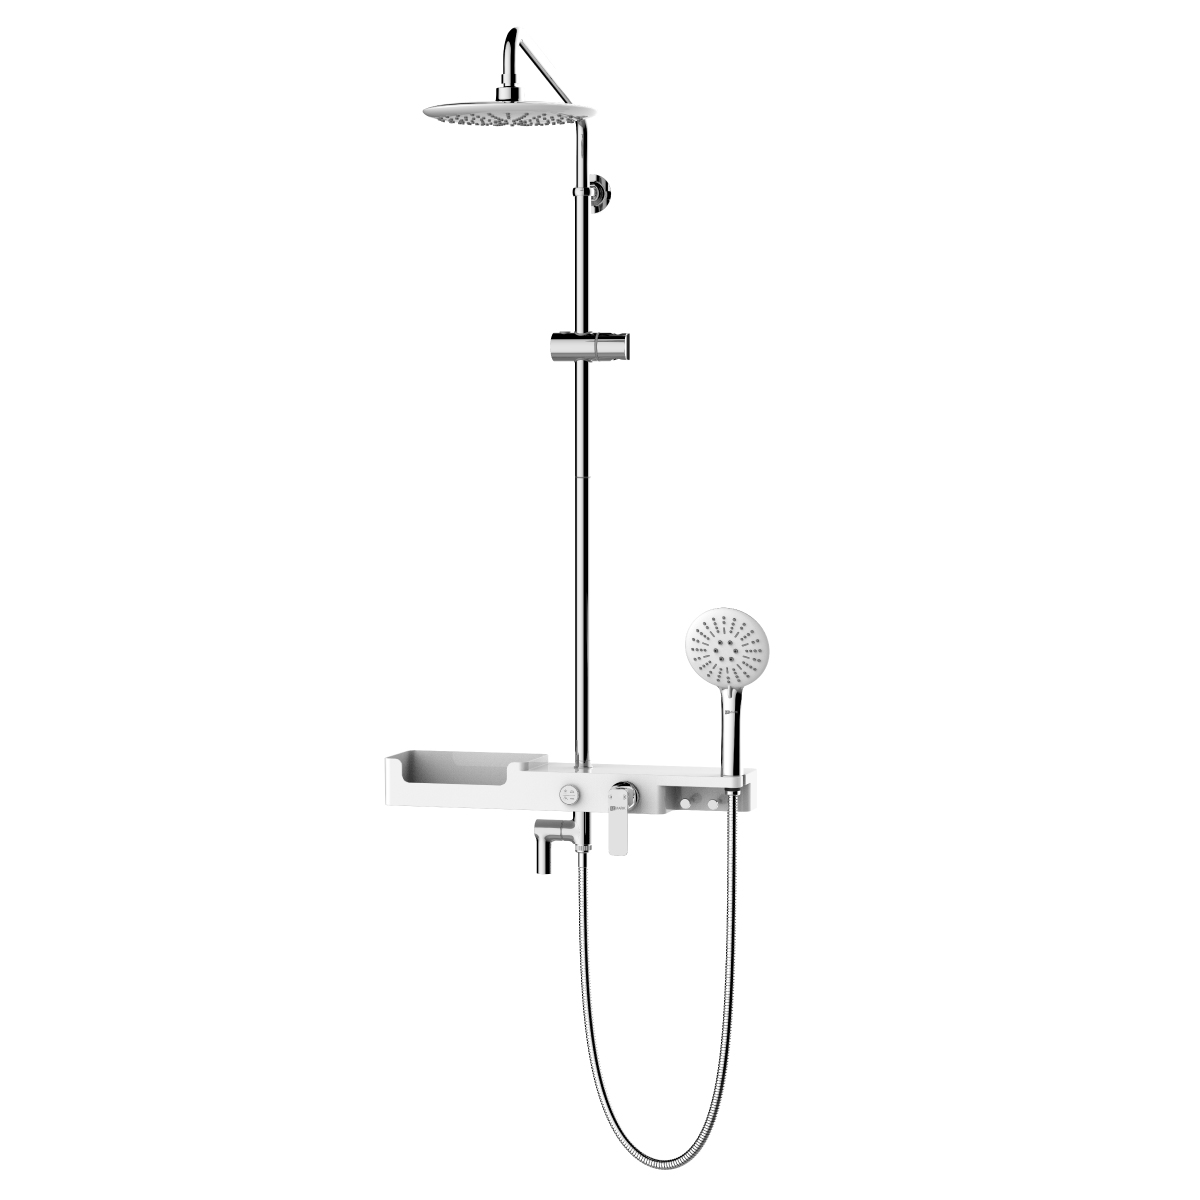 LM7007C Bath and shower faucet with adjustable rod height, swivel spout and «Tropical rain» shower head